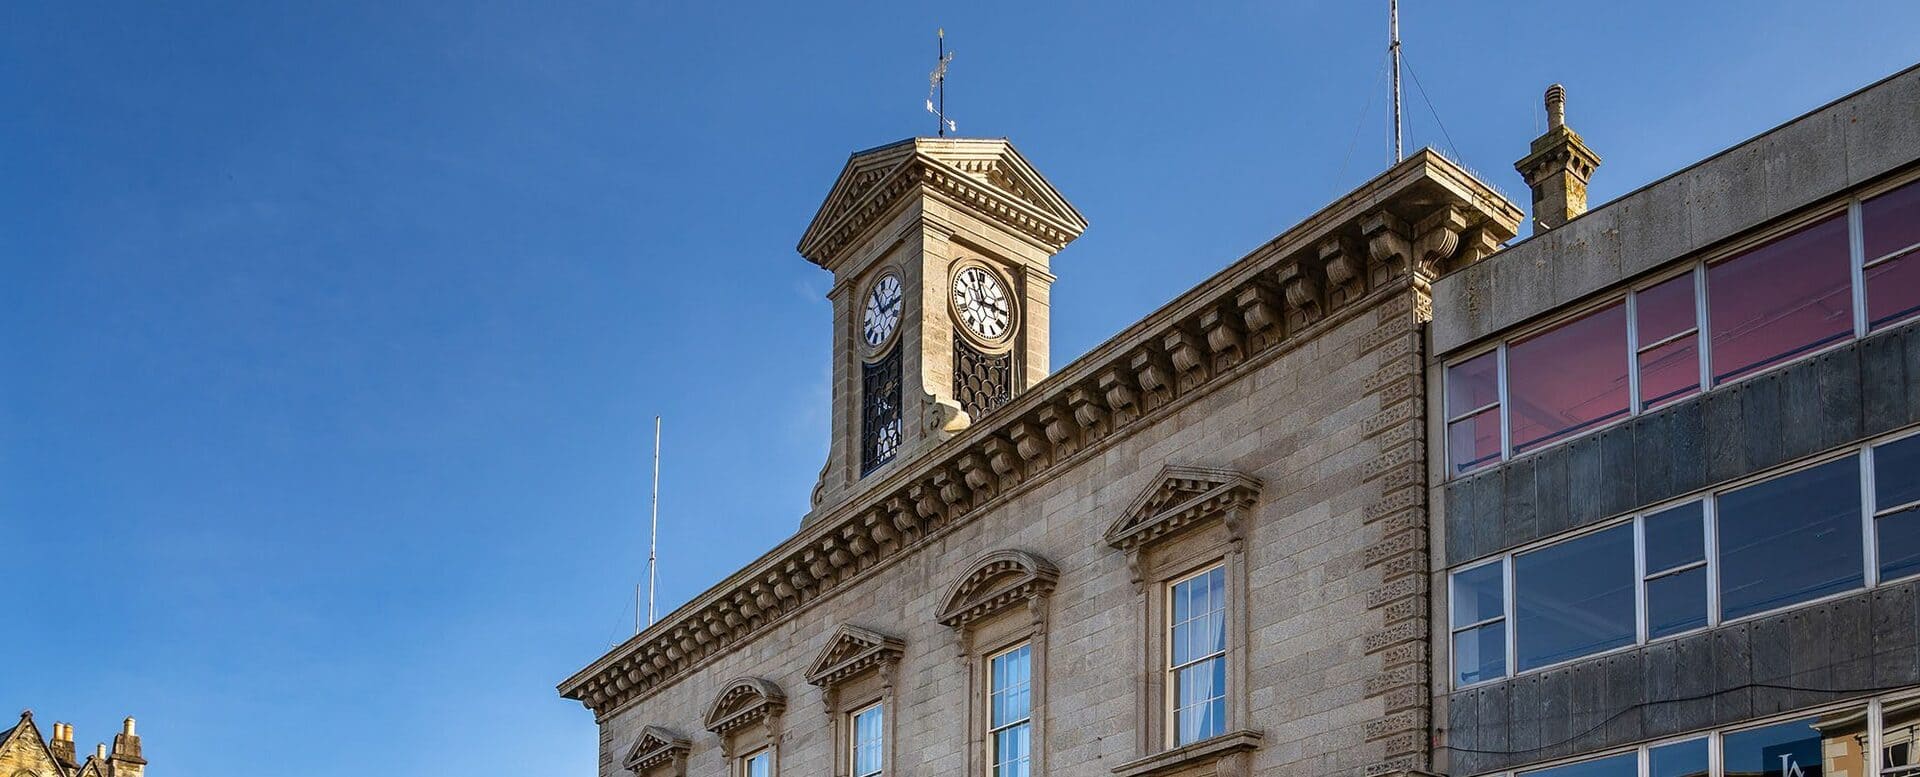 truro city hall clock tower featured image 1